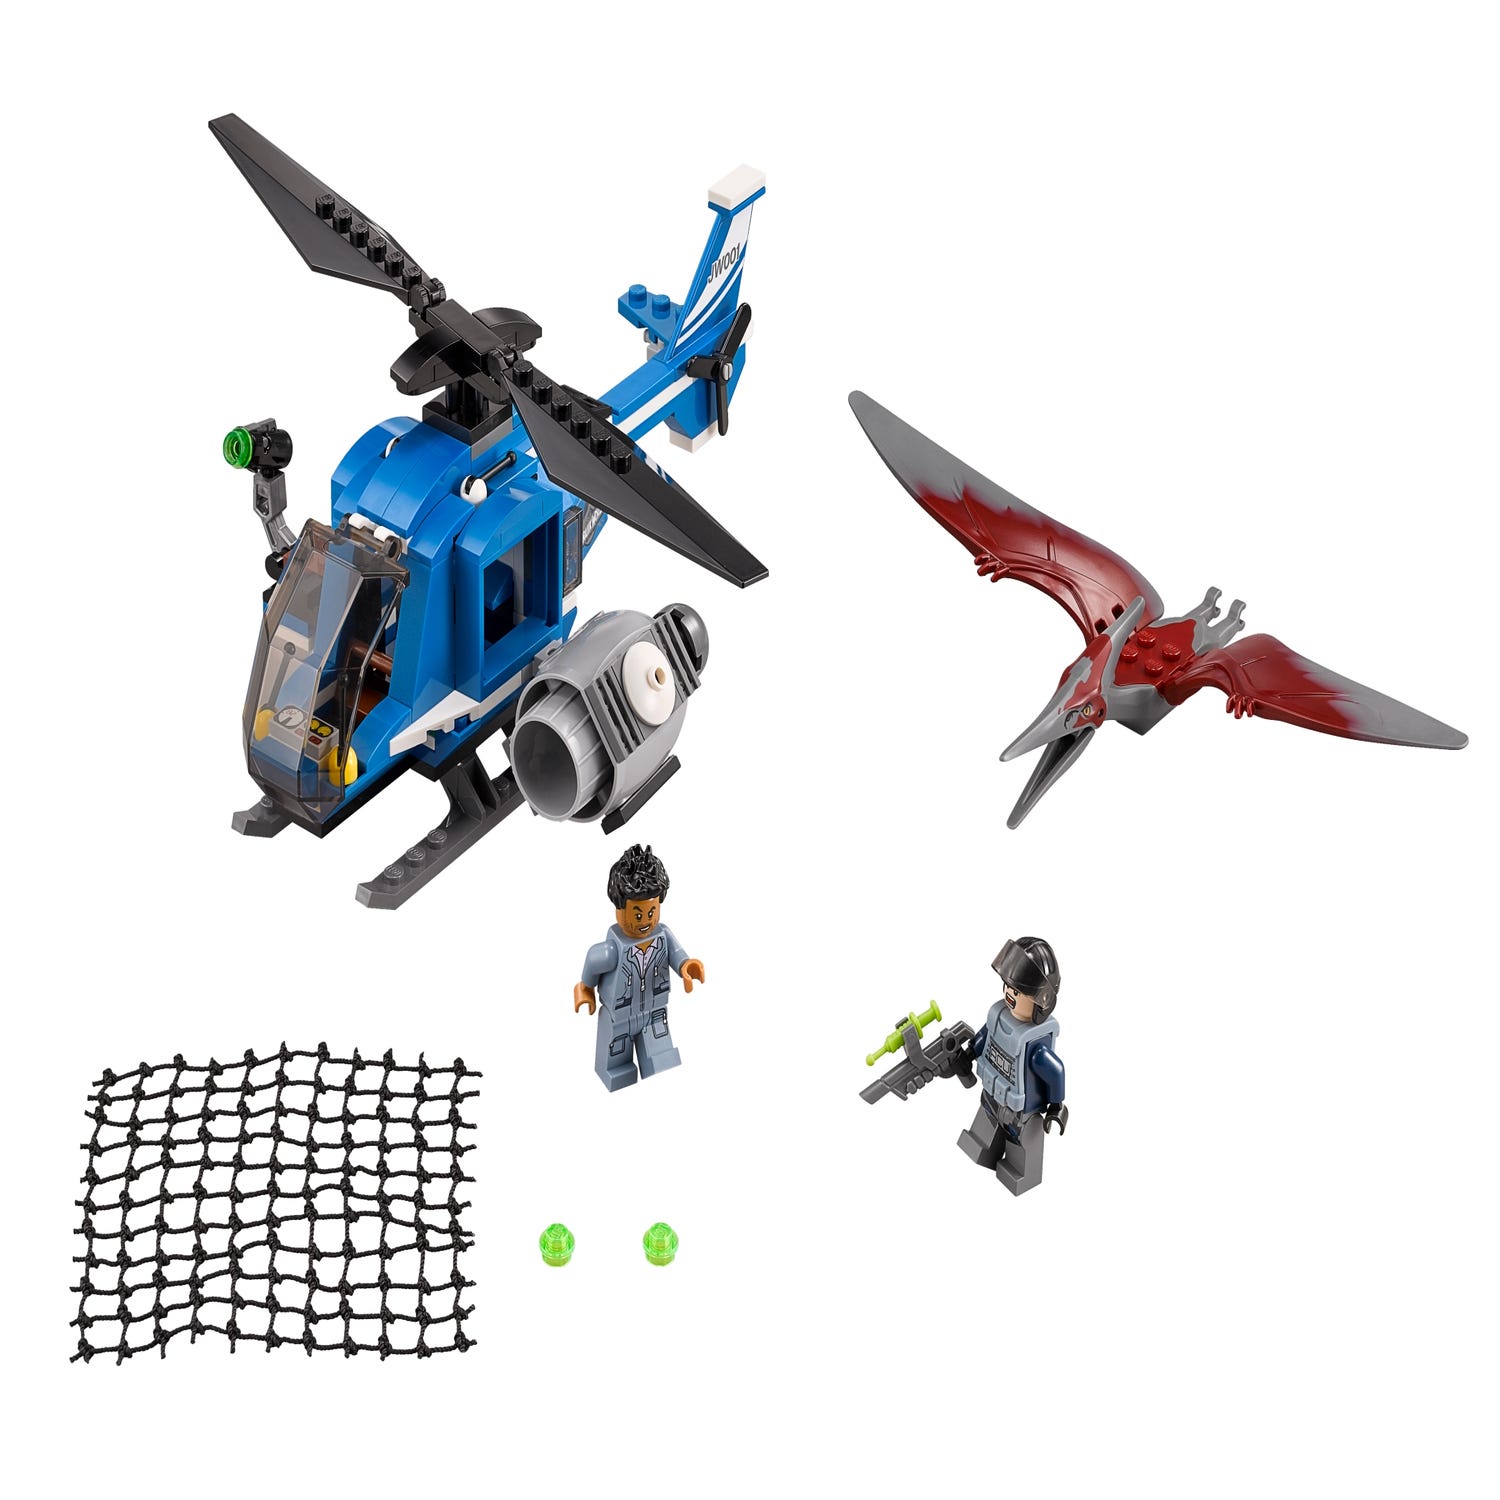 pteranodon-capture-75915-jurassic-world-buy-online-at-the-official-lego-shop-us